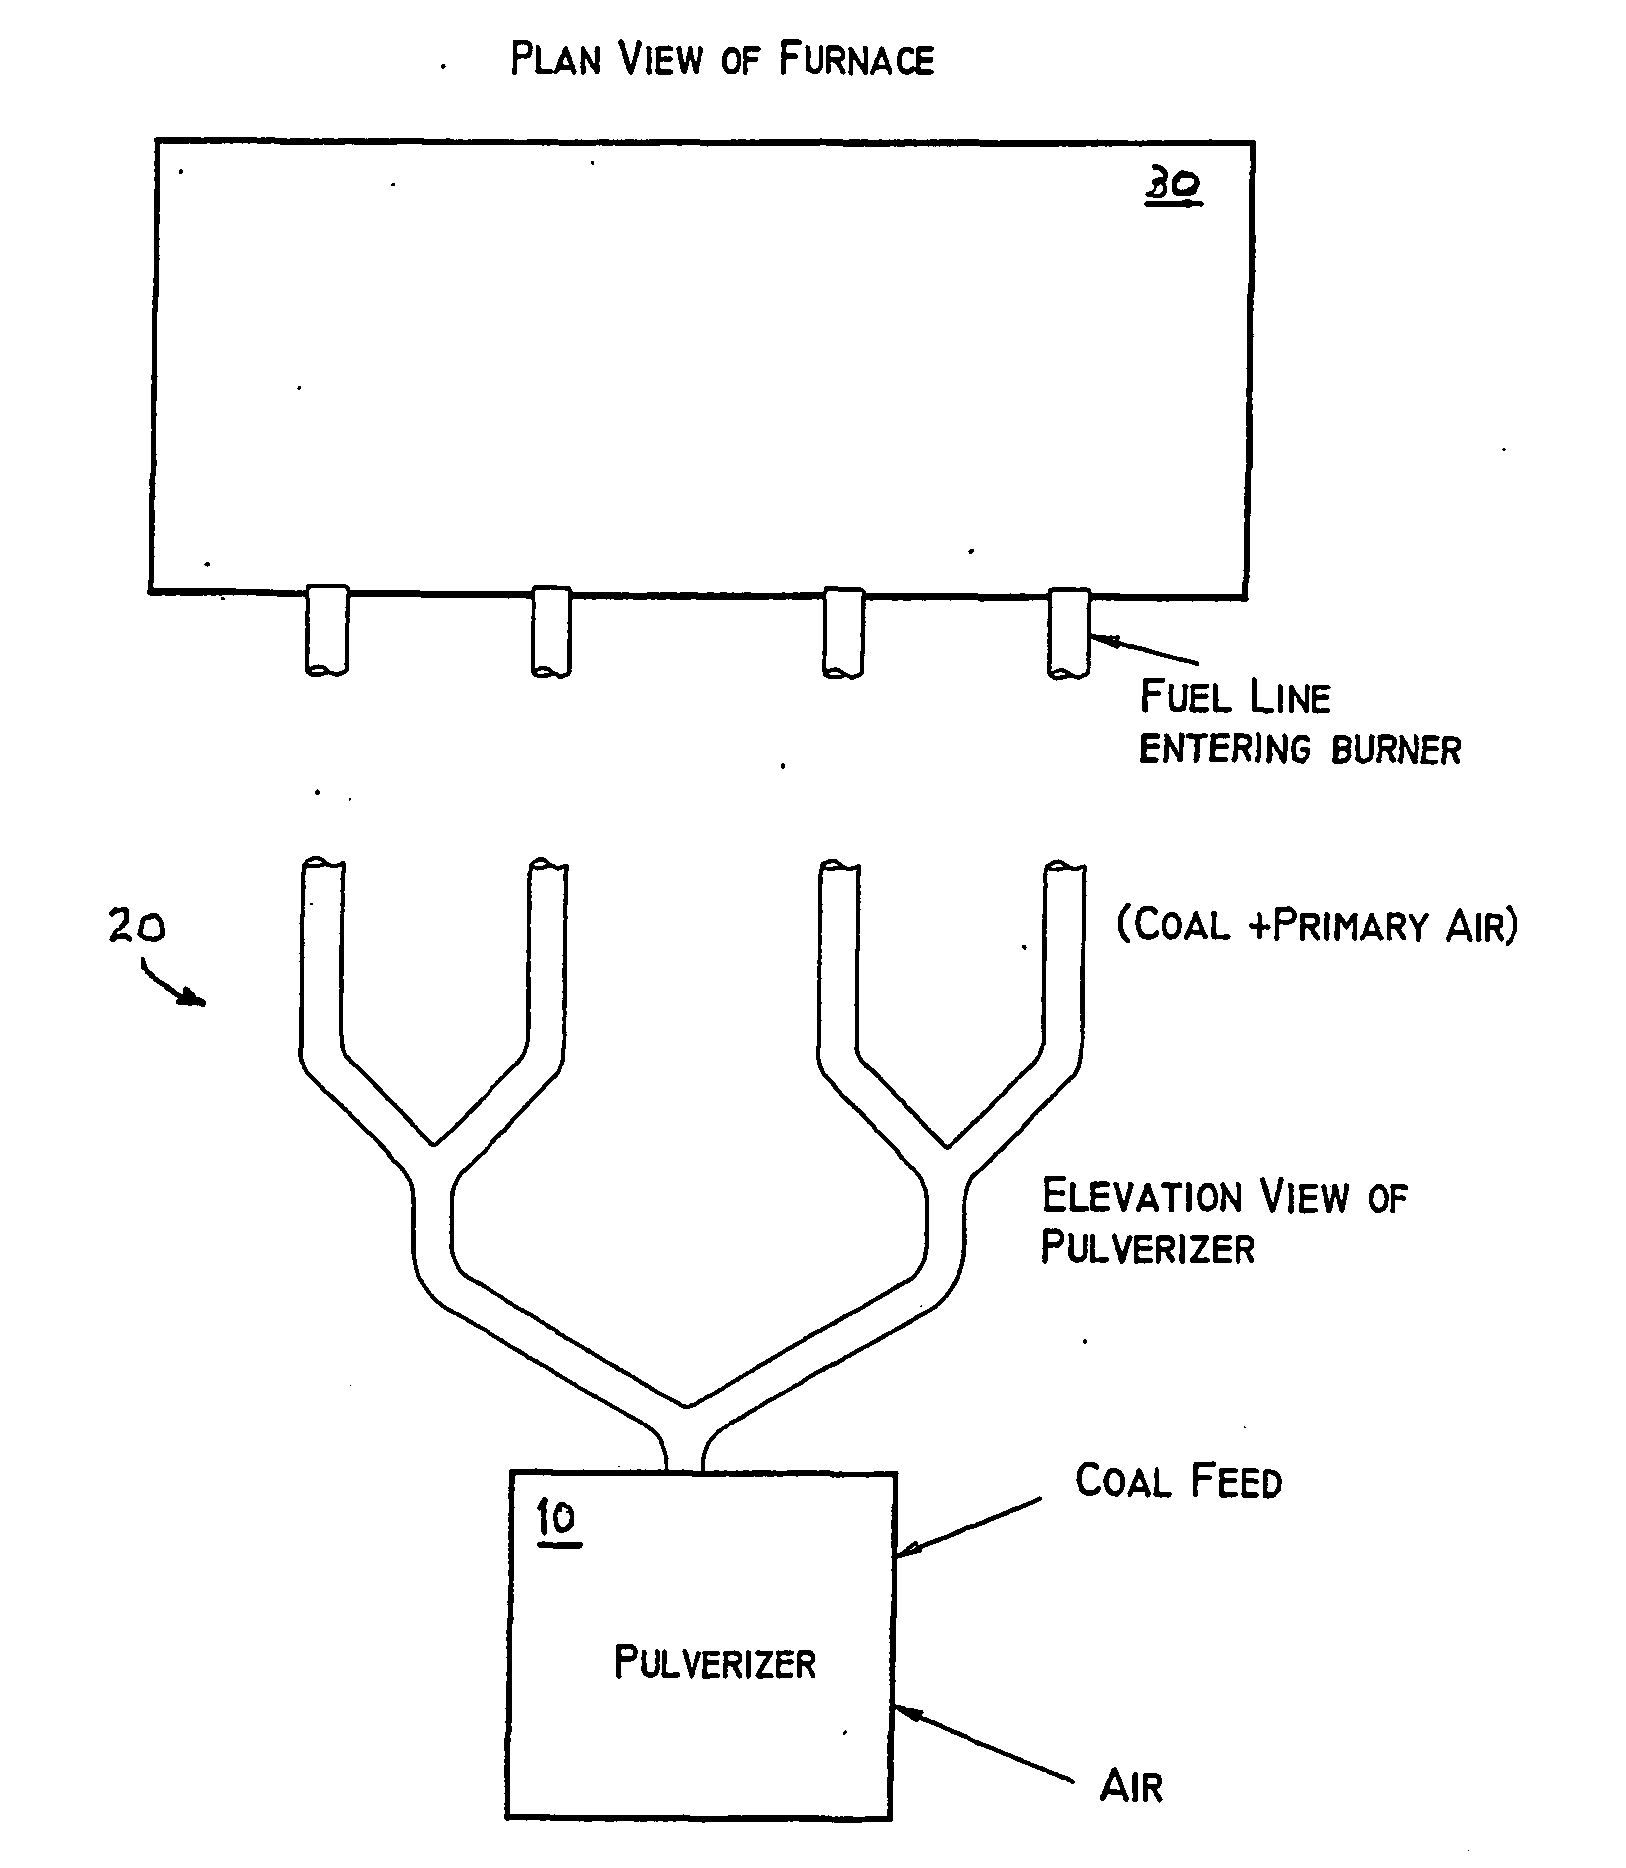 Adjustable air foils for balancing pulverized coal flow at a coal pipe splitter junction